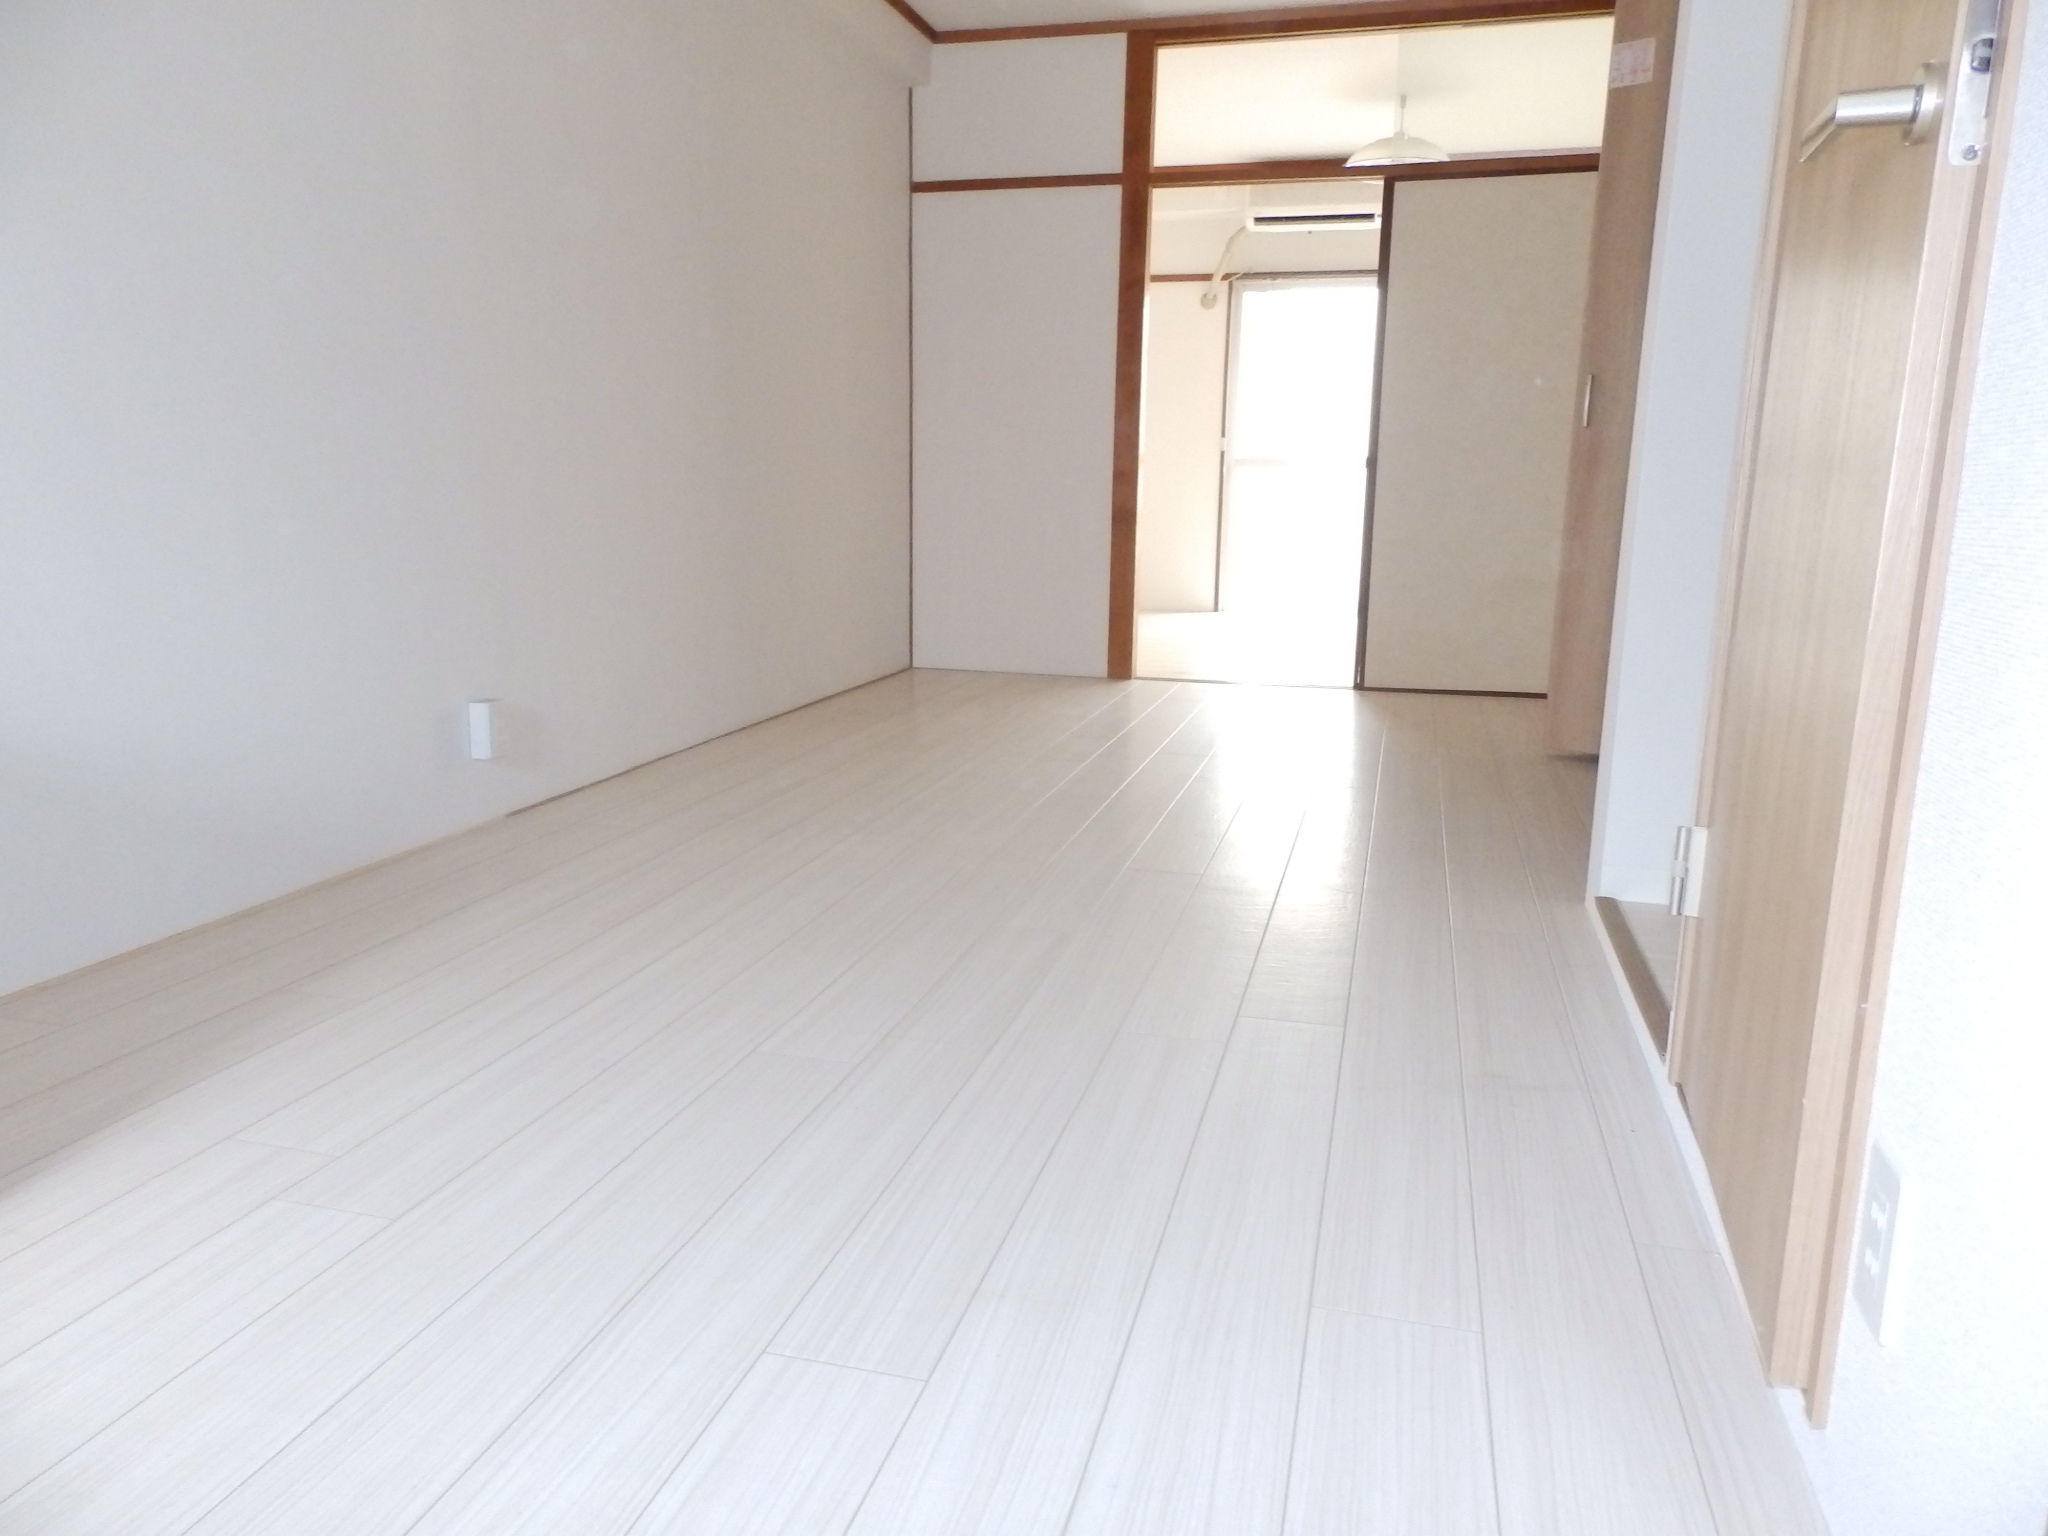 Living and room. It is a white flooring